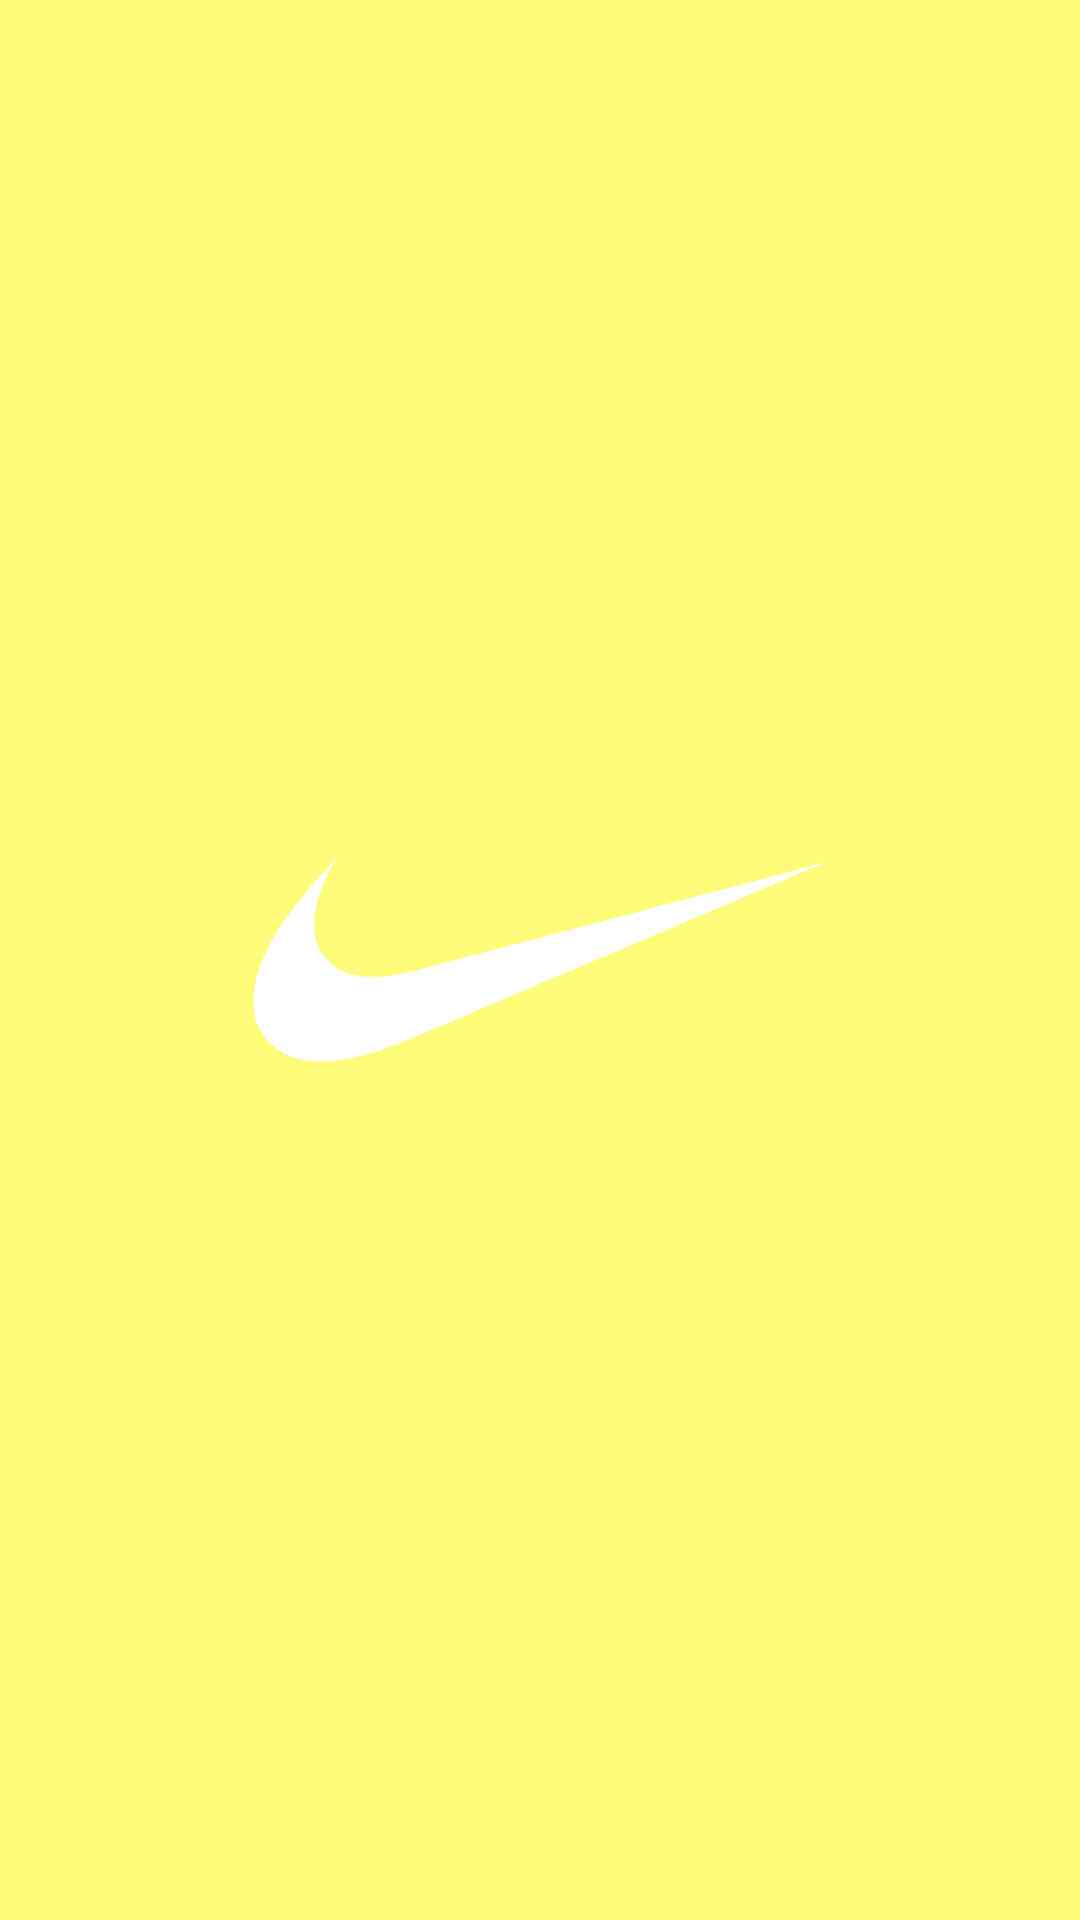 Nike イエロー Iphone Wallpapers